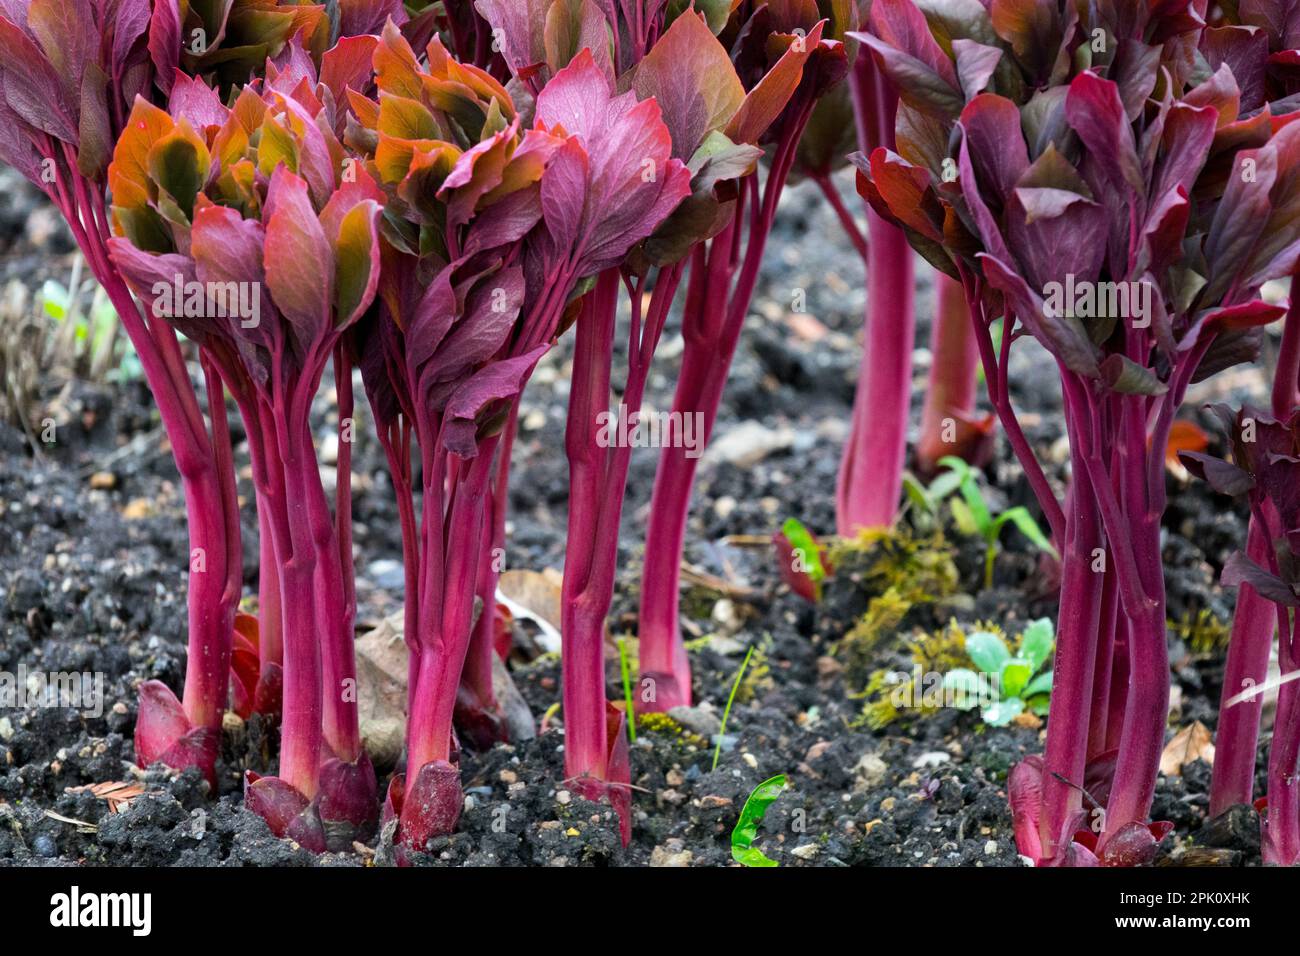 Early spring, Garden, Paeonia, Sprouts, Peonies, Budding, Peony, Sprouting, Plants, Red Stock Photo